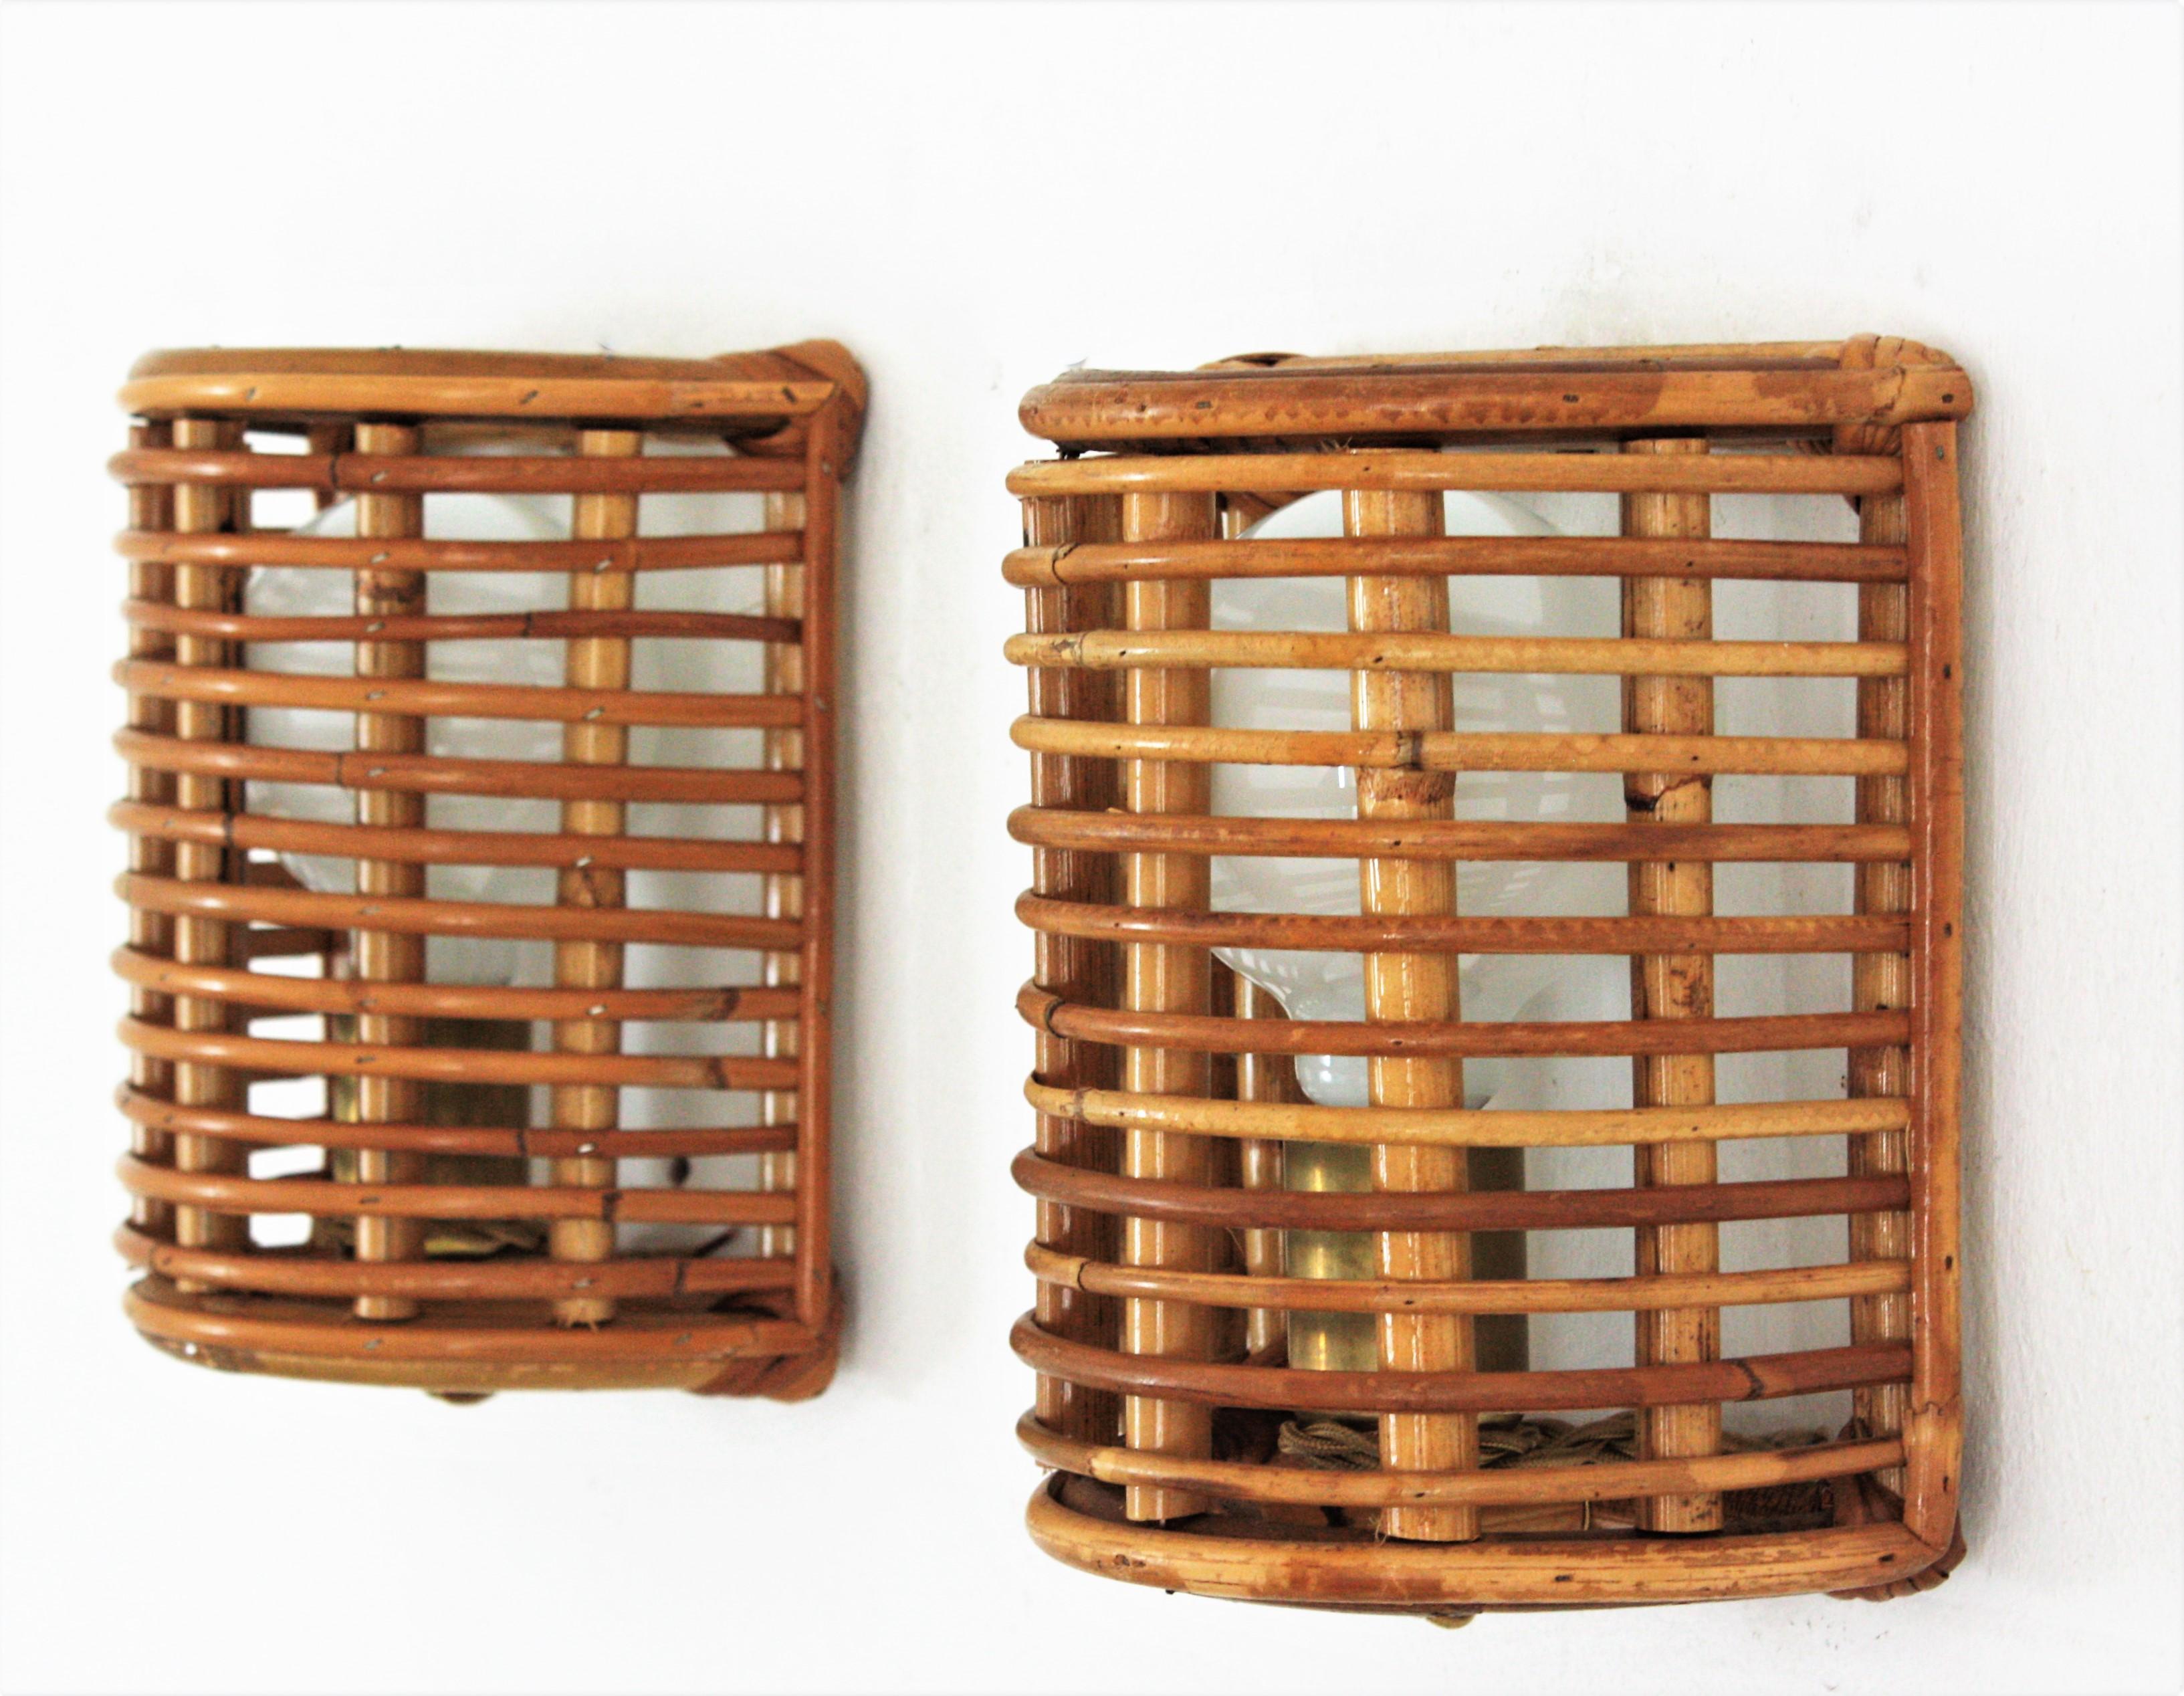 Pair of half cylinder wall lights with rattan and bamboo grid shades. Italy, 1960s.
These wall light fixtures feature a half cylinder bamboo structure covered with rattan canes in grid disposition. 
They will be the perfect choice to add a